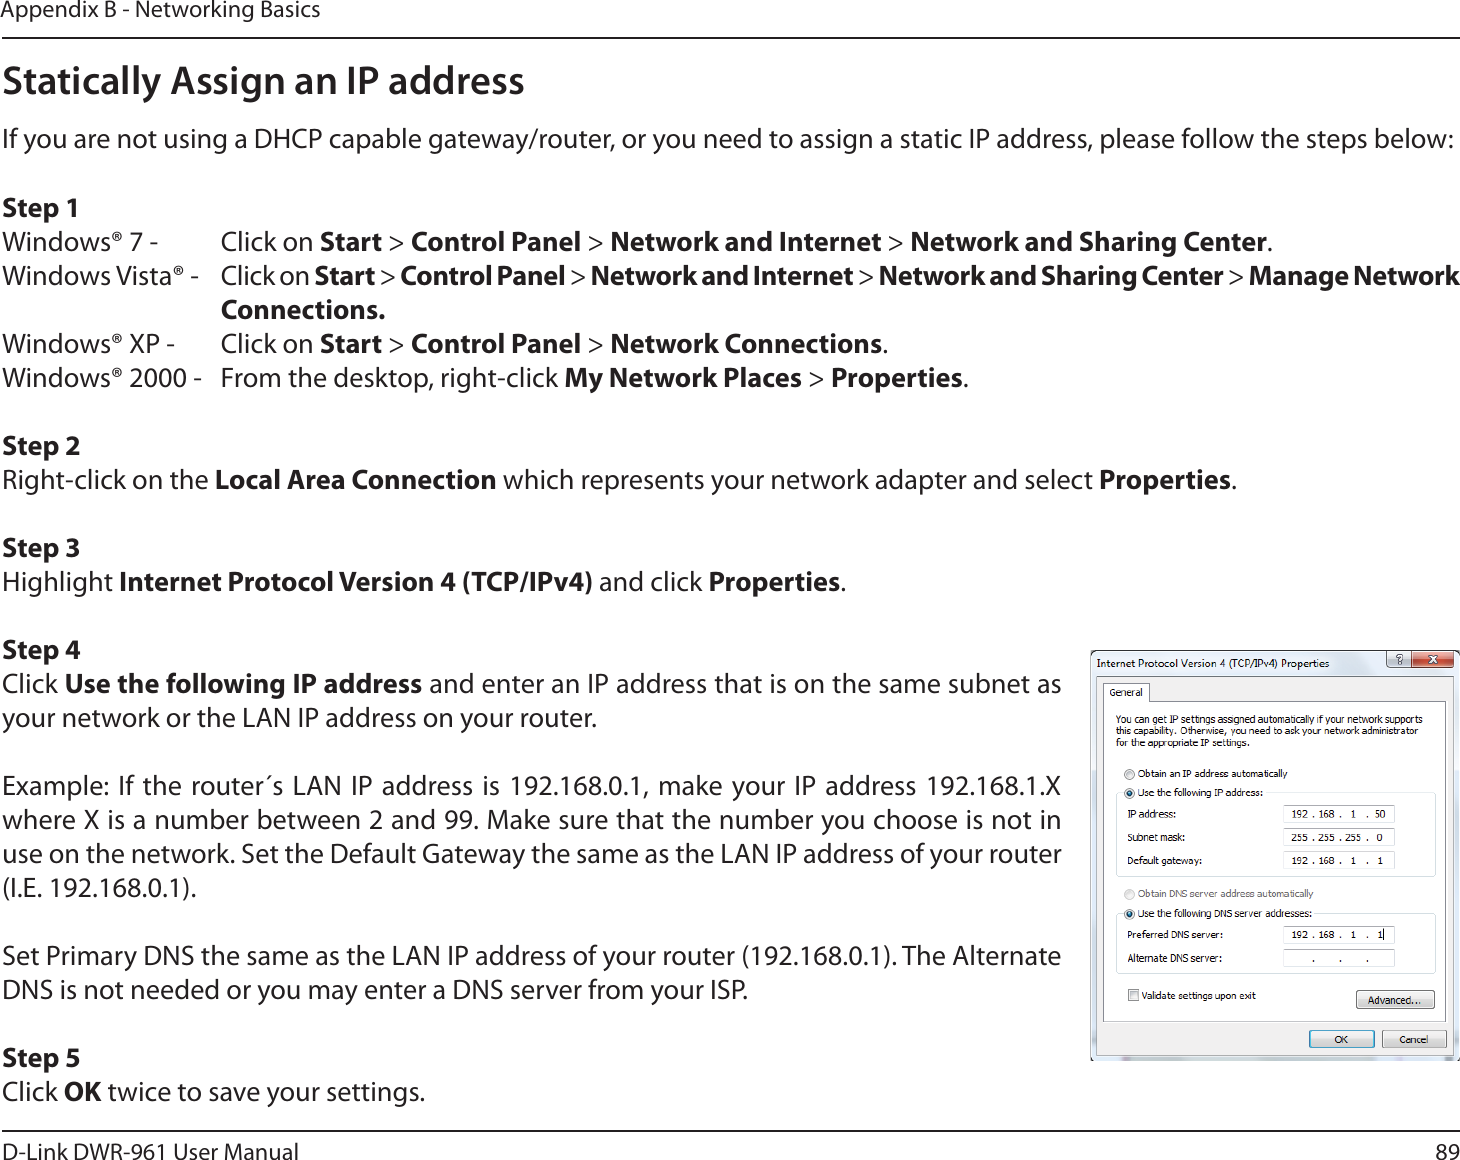 89D-Link DWR-9 User ManualAppendix B - Networking BasicsStatically Assign an IP addressIf you are not using a DHCP capable gateway/router, or you need to assign a static IP address, please follow the steps below:Step 1Windows® 7 -  Click on Start &gt; Control Panel &gt; Network and Internet &gt; Network and Sharing Center.Windows Vista® -  Click on Start &gt; Control Panel &gt; Network and Internet &gt; Network and Sharing Center &gt; Manage Network    Connections.Windows® XP -  Click on Start &gt; Control Panel &gt; Network Connections.Windows® 2000 -  From the desktop, right-click My Network Places &gt; Properties.Step 2Right-click on the Local Area Connection which represents your network adapter and select Properties.Step 3Highlight Internet Protocol Version 4 (TCP/IPv4) and click Properties.Step 4Click Use the following IP address and enter an IP address that is on the same subnet as your network or the LAN IP address on your router. Example: If the router´s LAN IP address is 192.168.0.1, make your IP address 192.168.1.X where X is a number between 2 and 99. Make sure that the number you choose is not in use on the network. Set the Default Gateway the same as the LAN IP address of your router (I.E. 192.168.0.1). Set Primary DNS the same as the LAN IP address of your router (192.168.0.1). The Alternate DNS is not needed or you may enter a DNS server from your ISP.Step 5Click OK twice to save your settings.